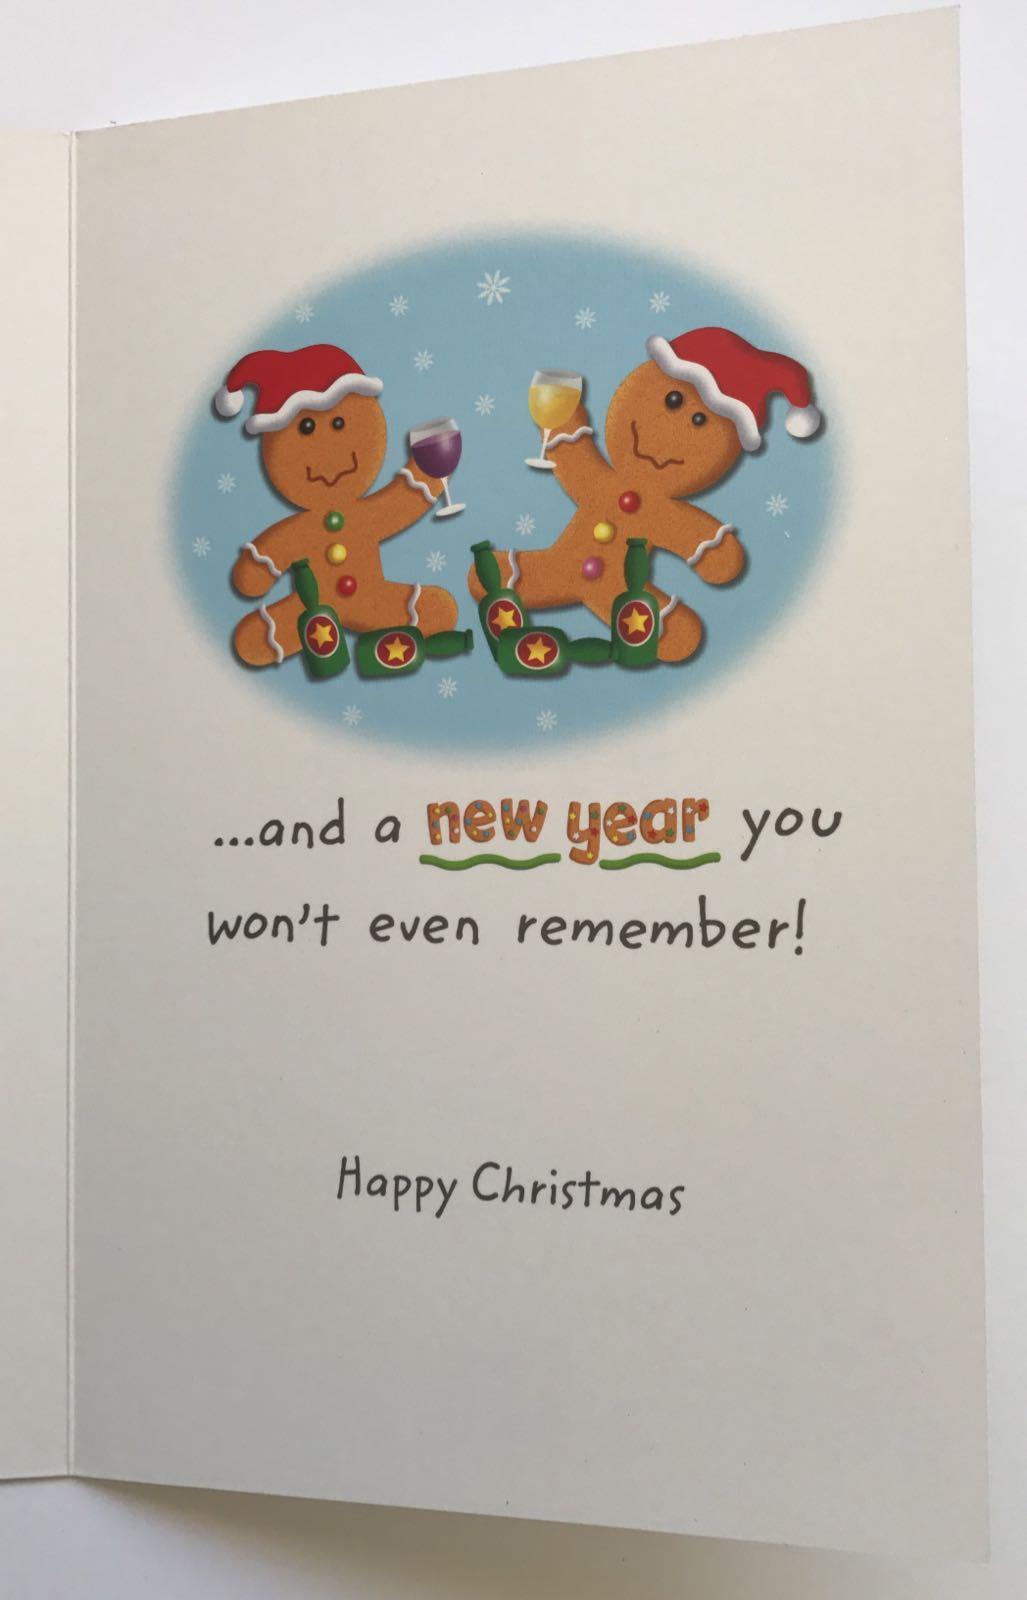 To Both of You Ginger Biscuit Fun Design Christmas And New Year Card 